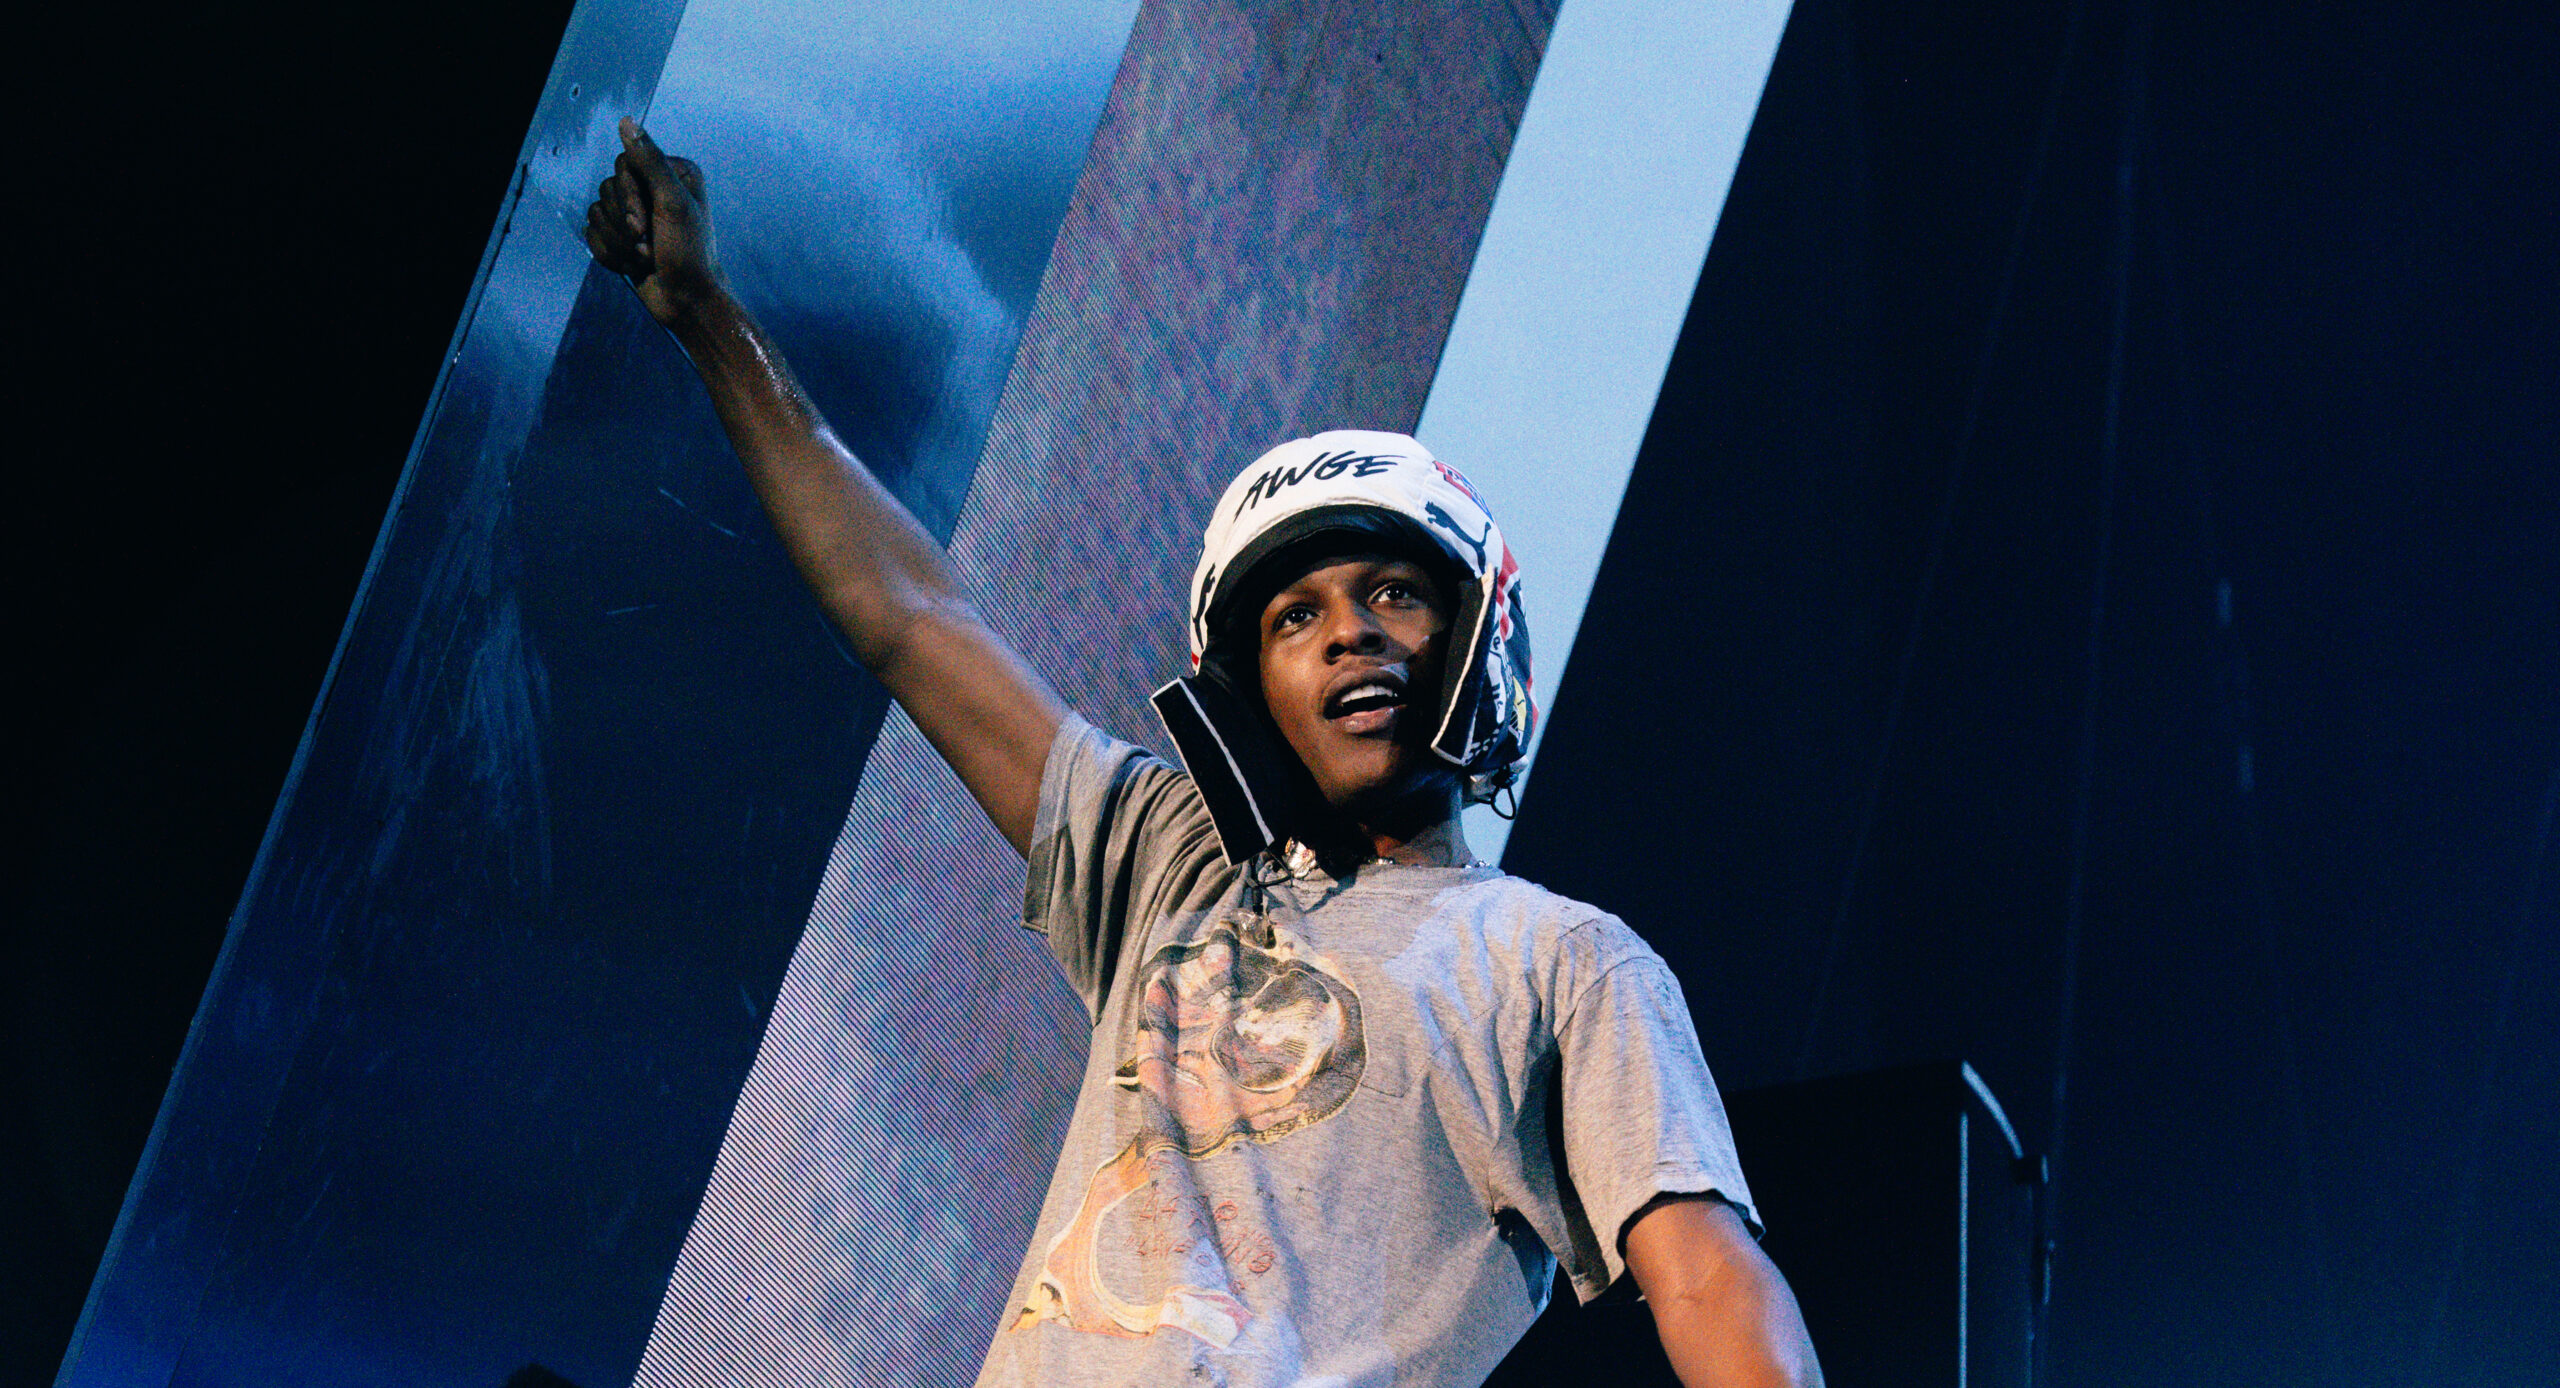 A$AP Rocky performs at the Saudi Arabia Grand Prix, wearing gear from his upcoming collaboration with PUMA.